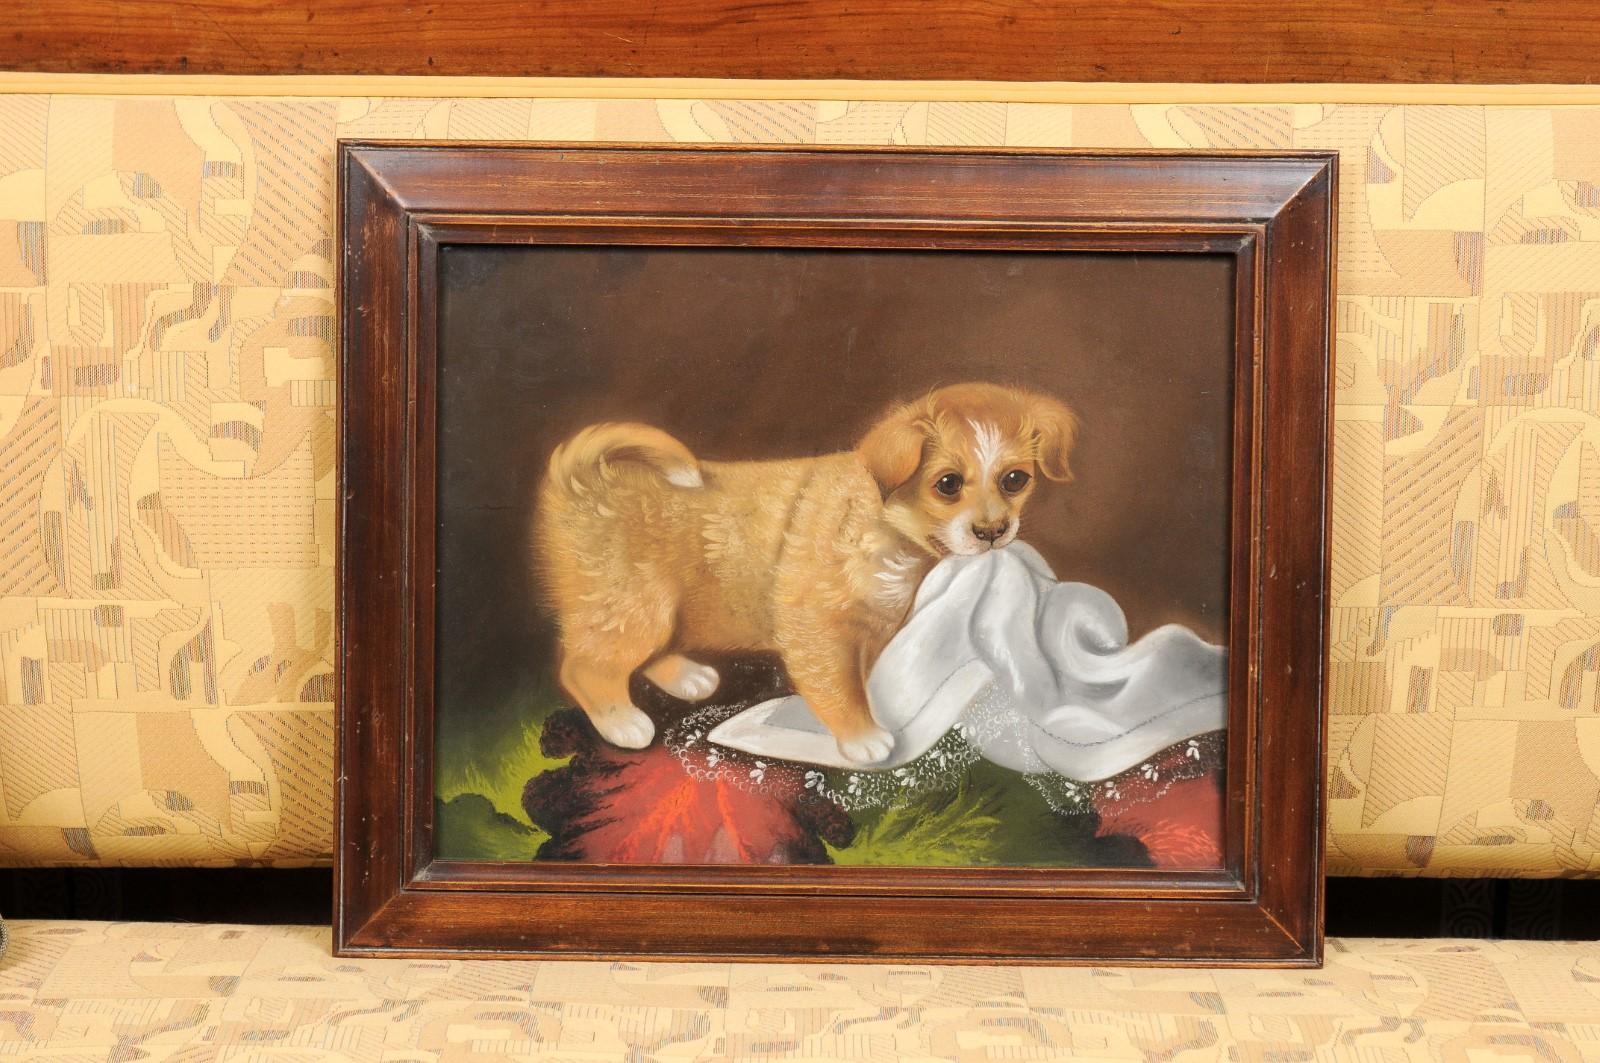 Late 19th century pastel dog portrait of puppy with tablecloth in wooden frame.